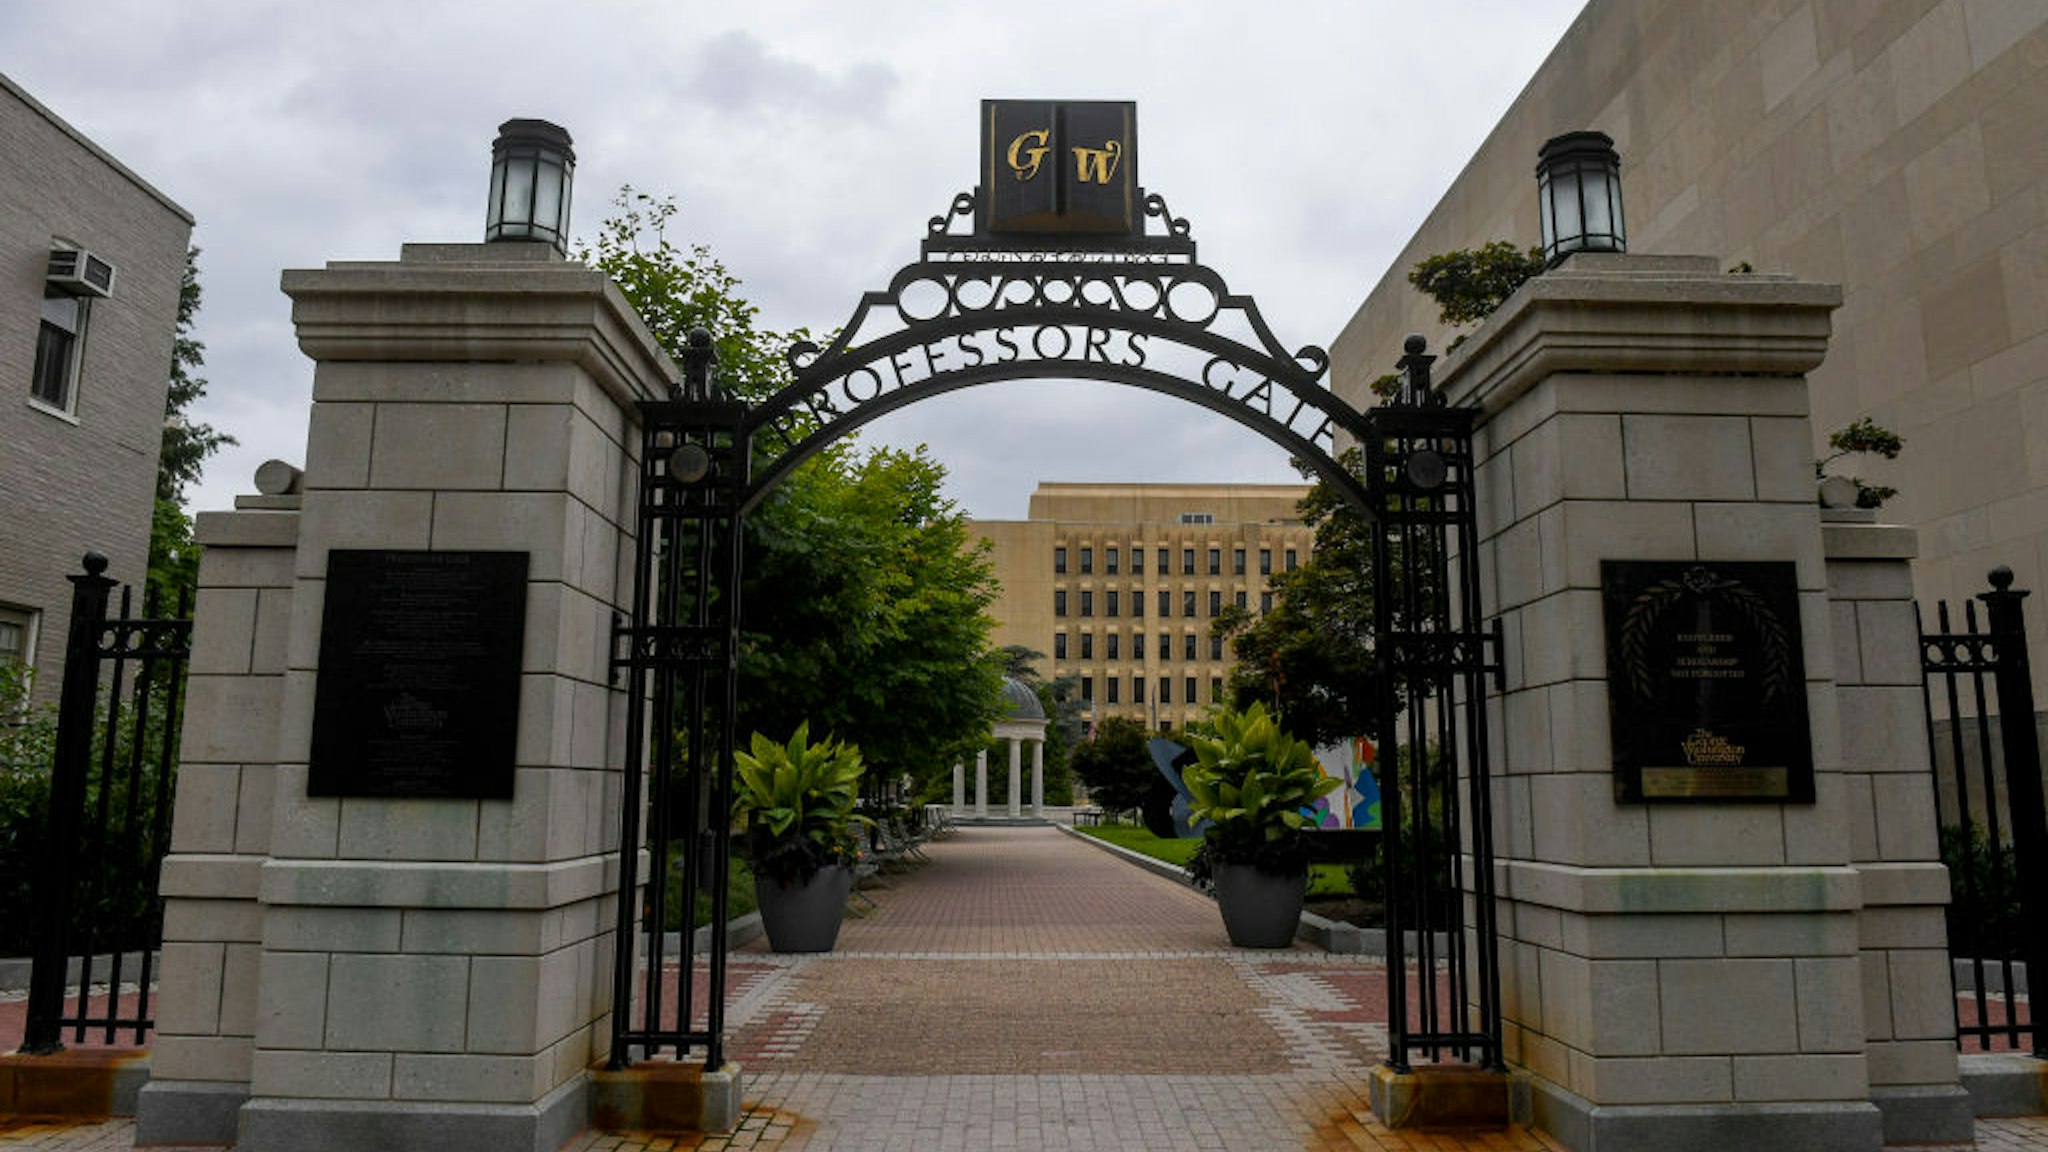 WASHINGTON, DC - AUGUST 8: George Washington University amended its plans to host classes for the fall as novel coronavirus cases continue to rise across the country.